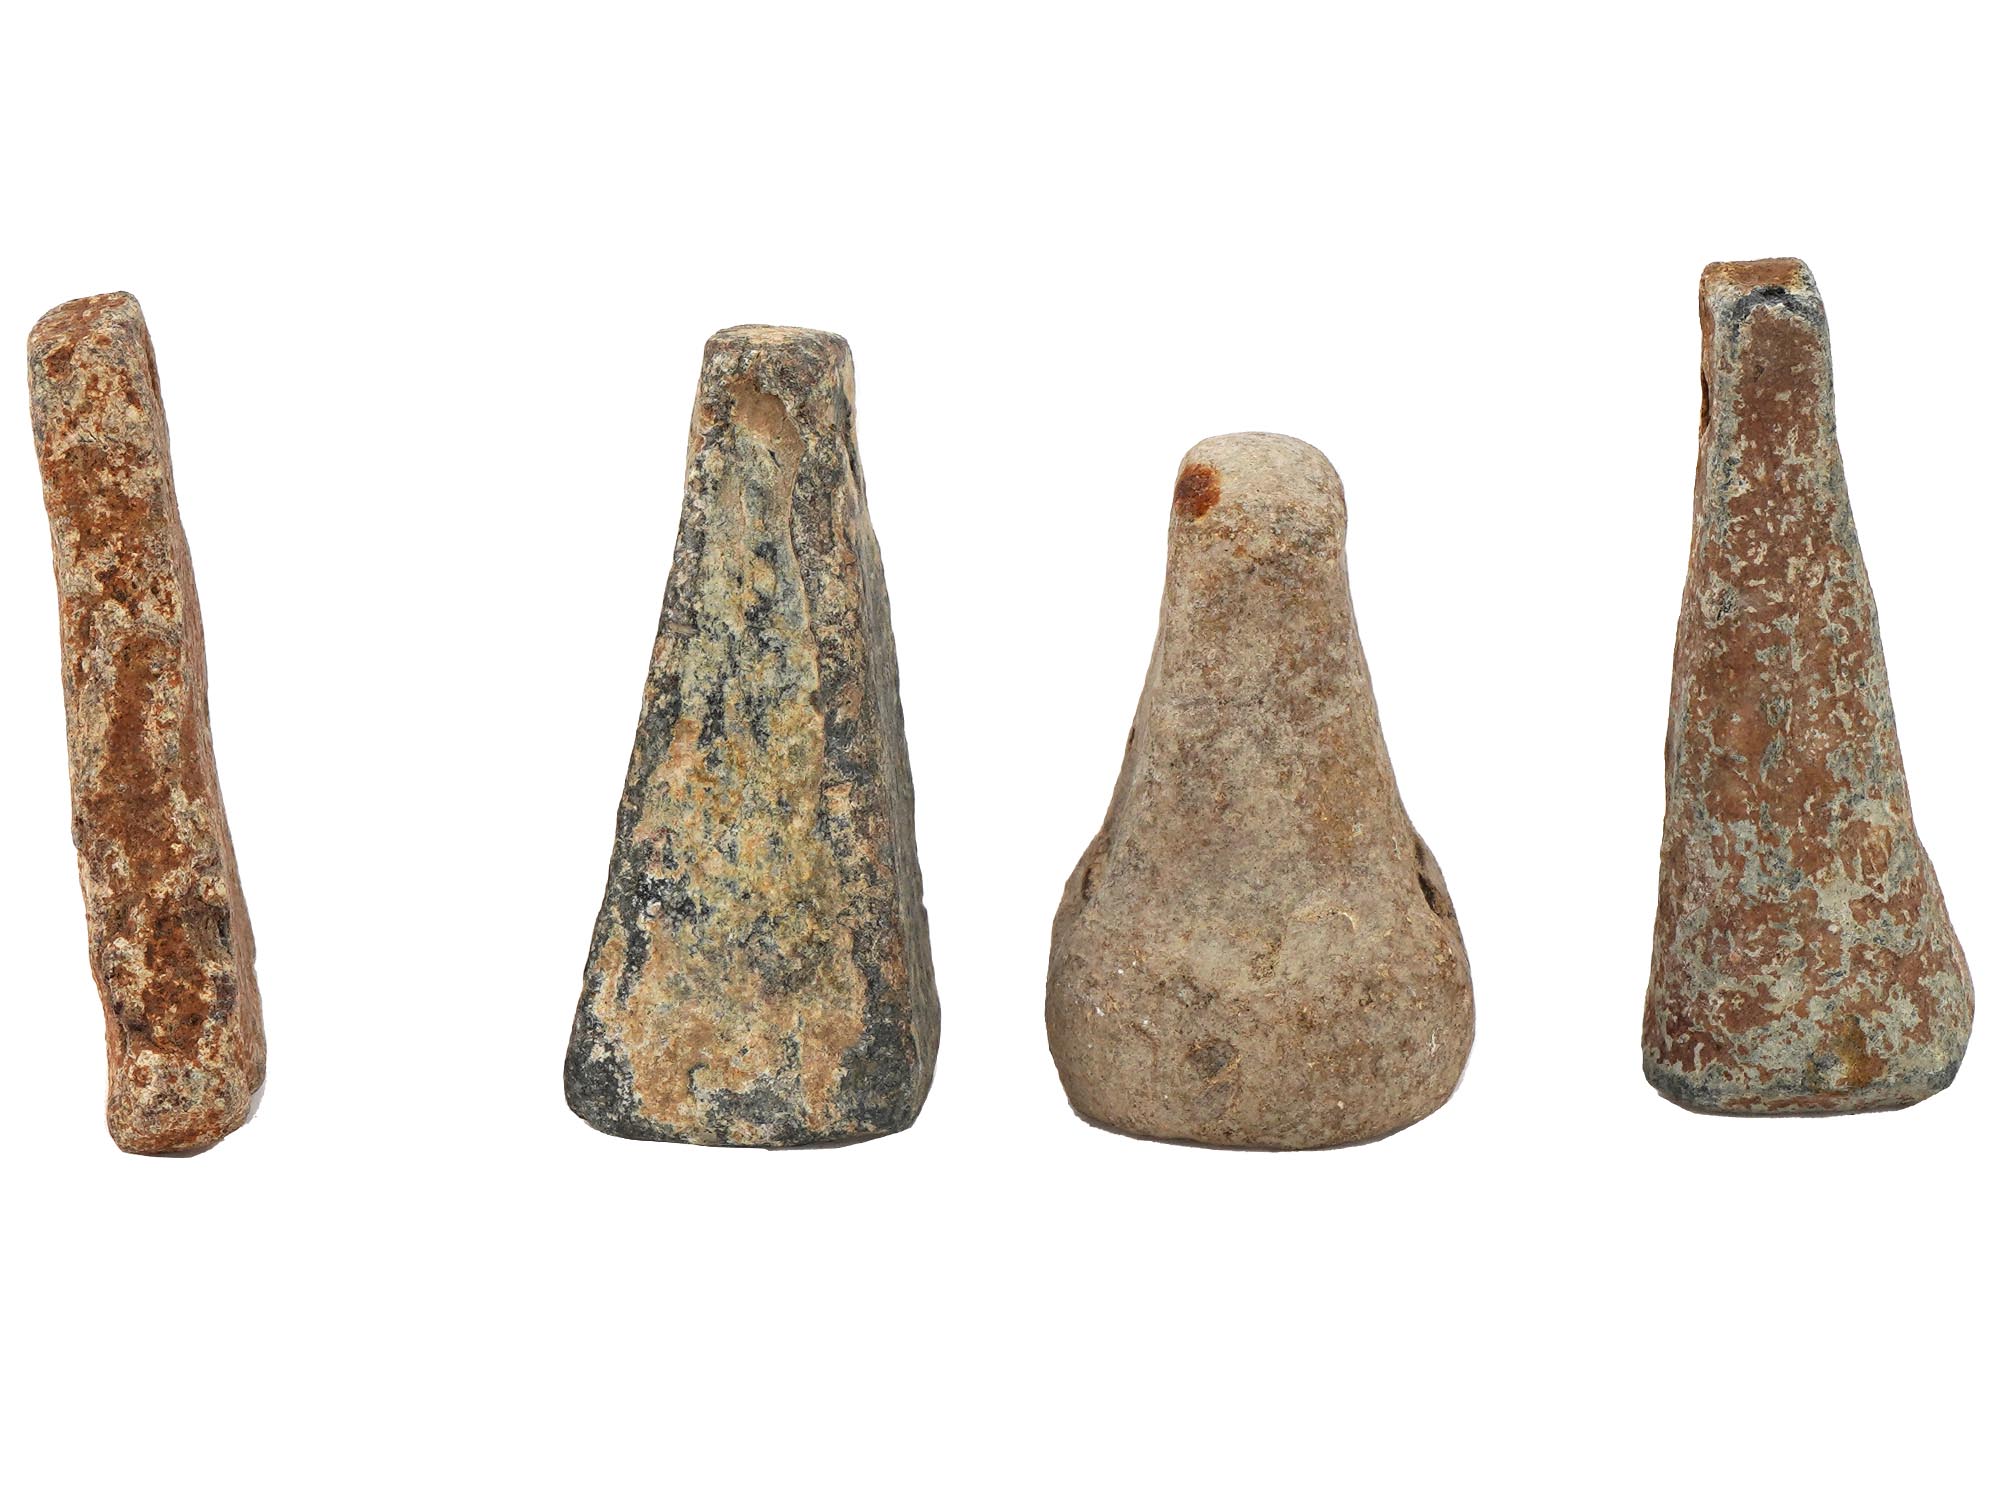 FOUR ANCIENT ROMAN LEAD LOOM WEIGHTS TEXTILE TOOLS PIC-3